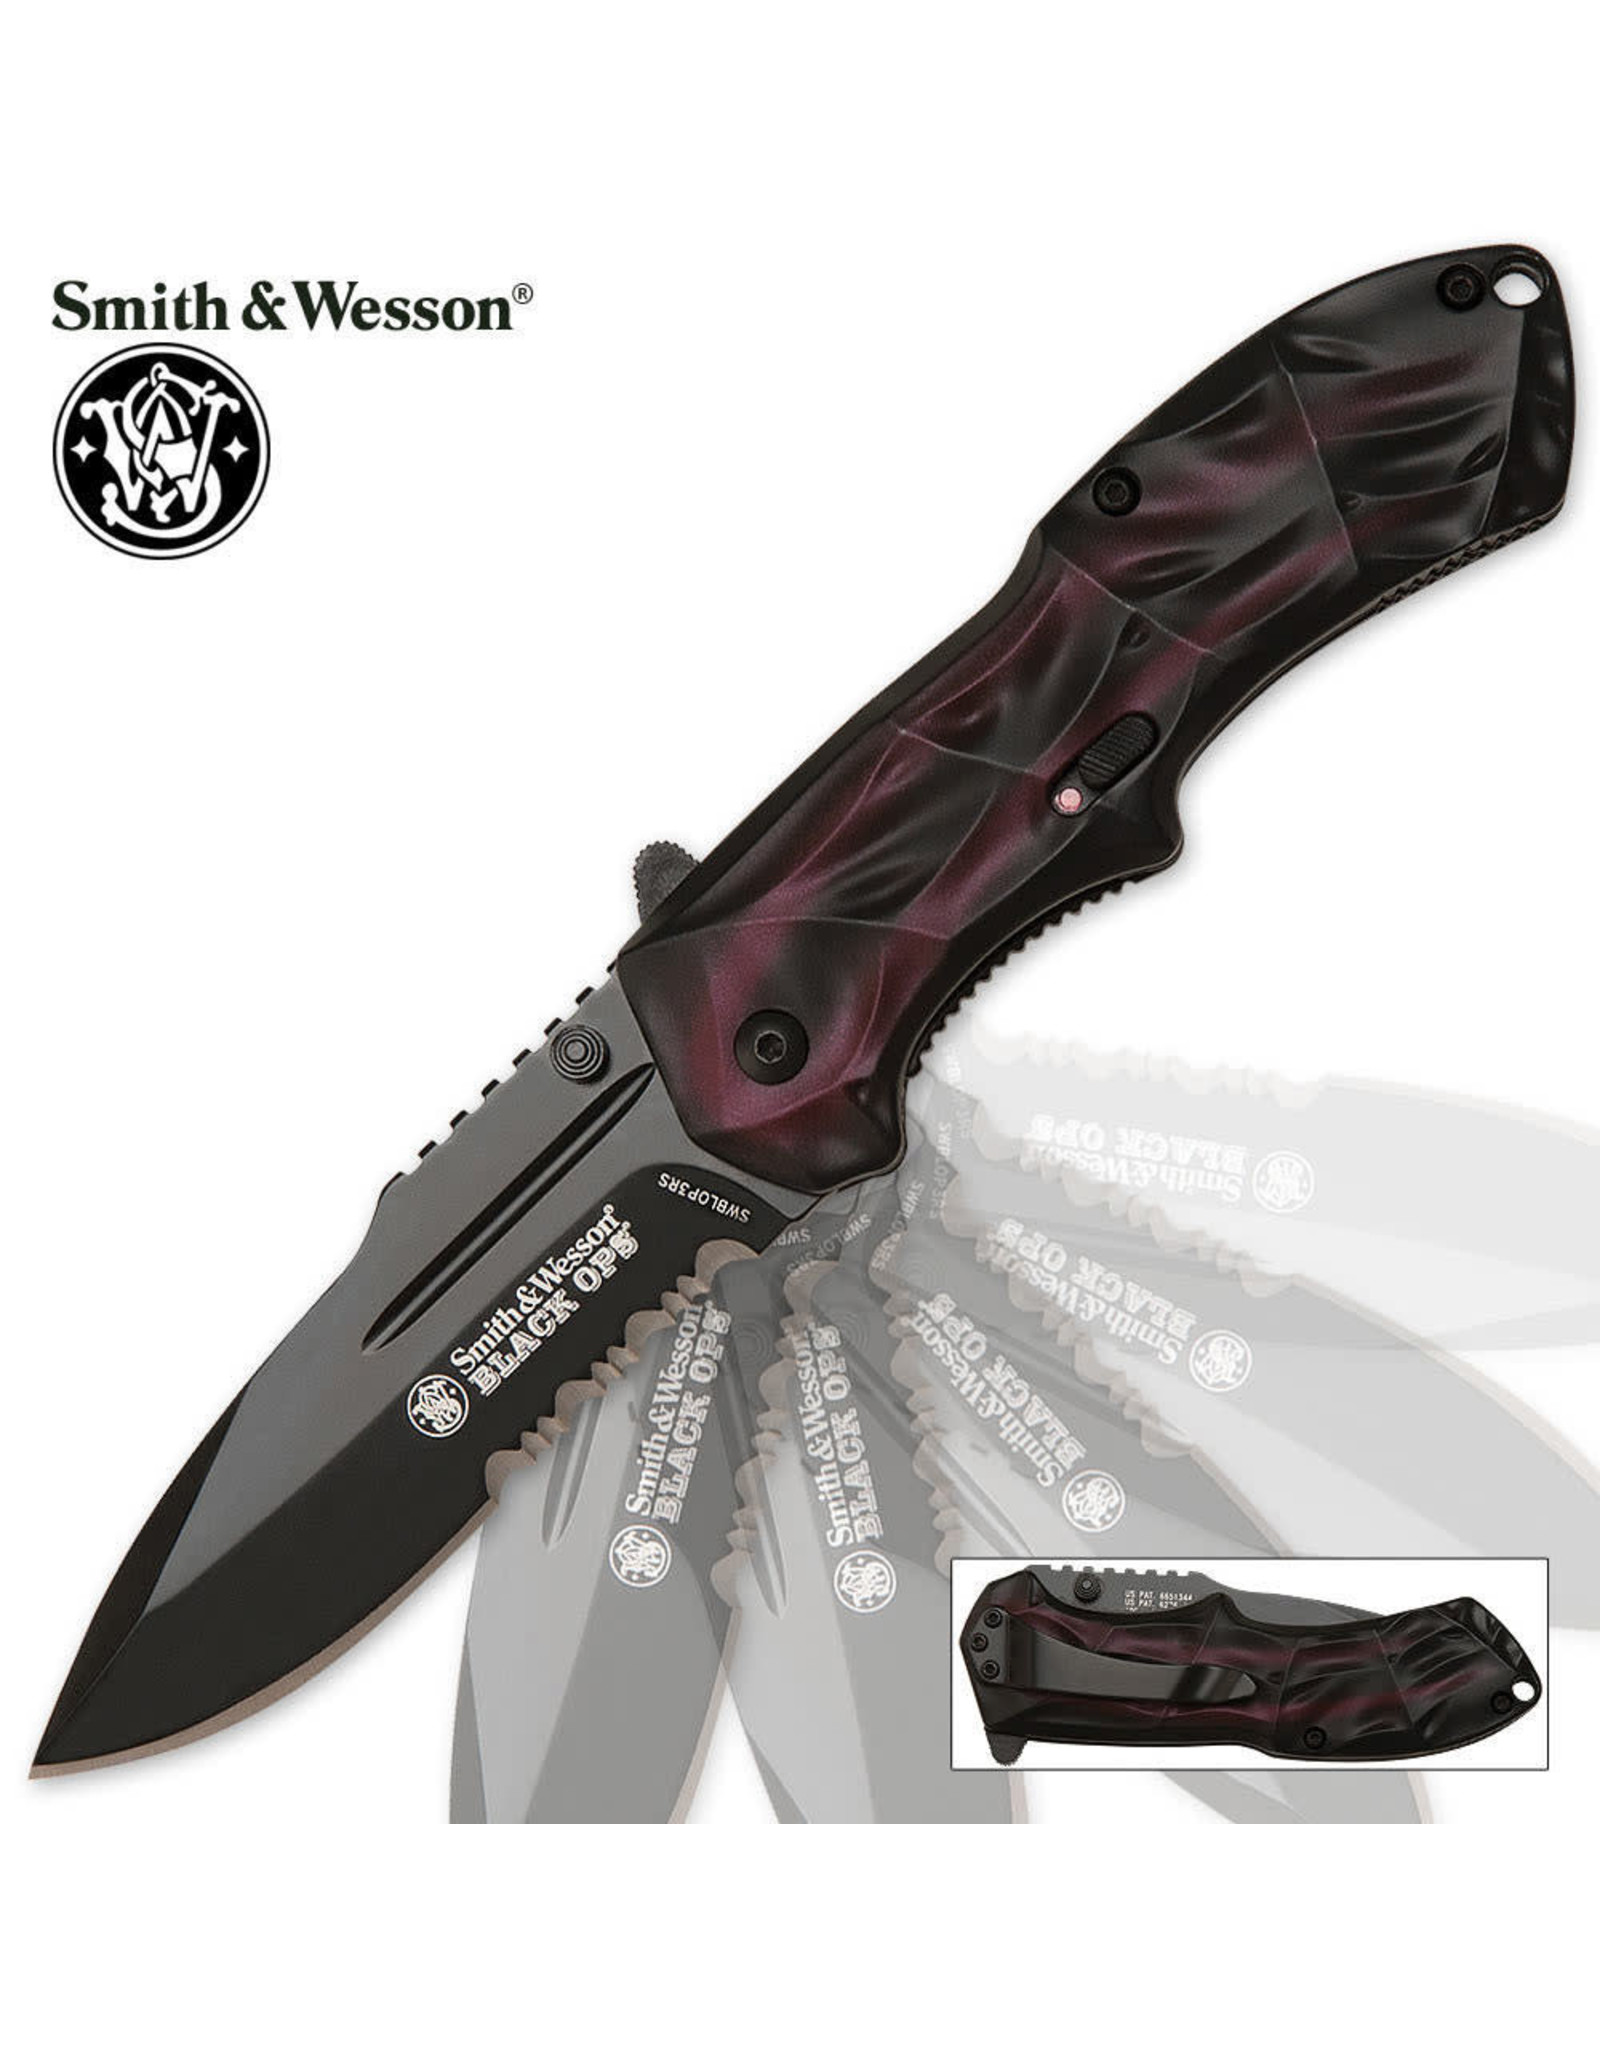 Smith & Wesson Smith & Wesson Black Ops Assisted Opening Pocket Knife